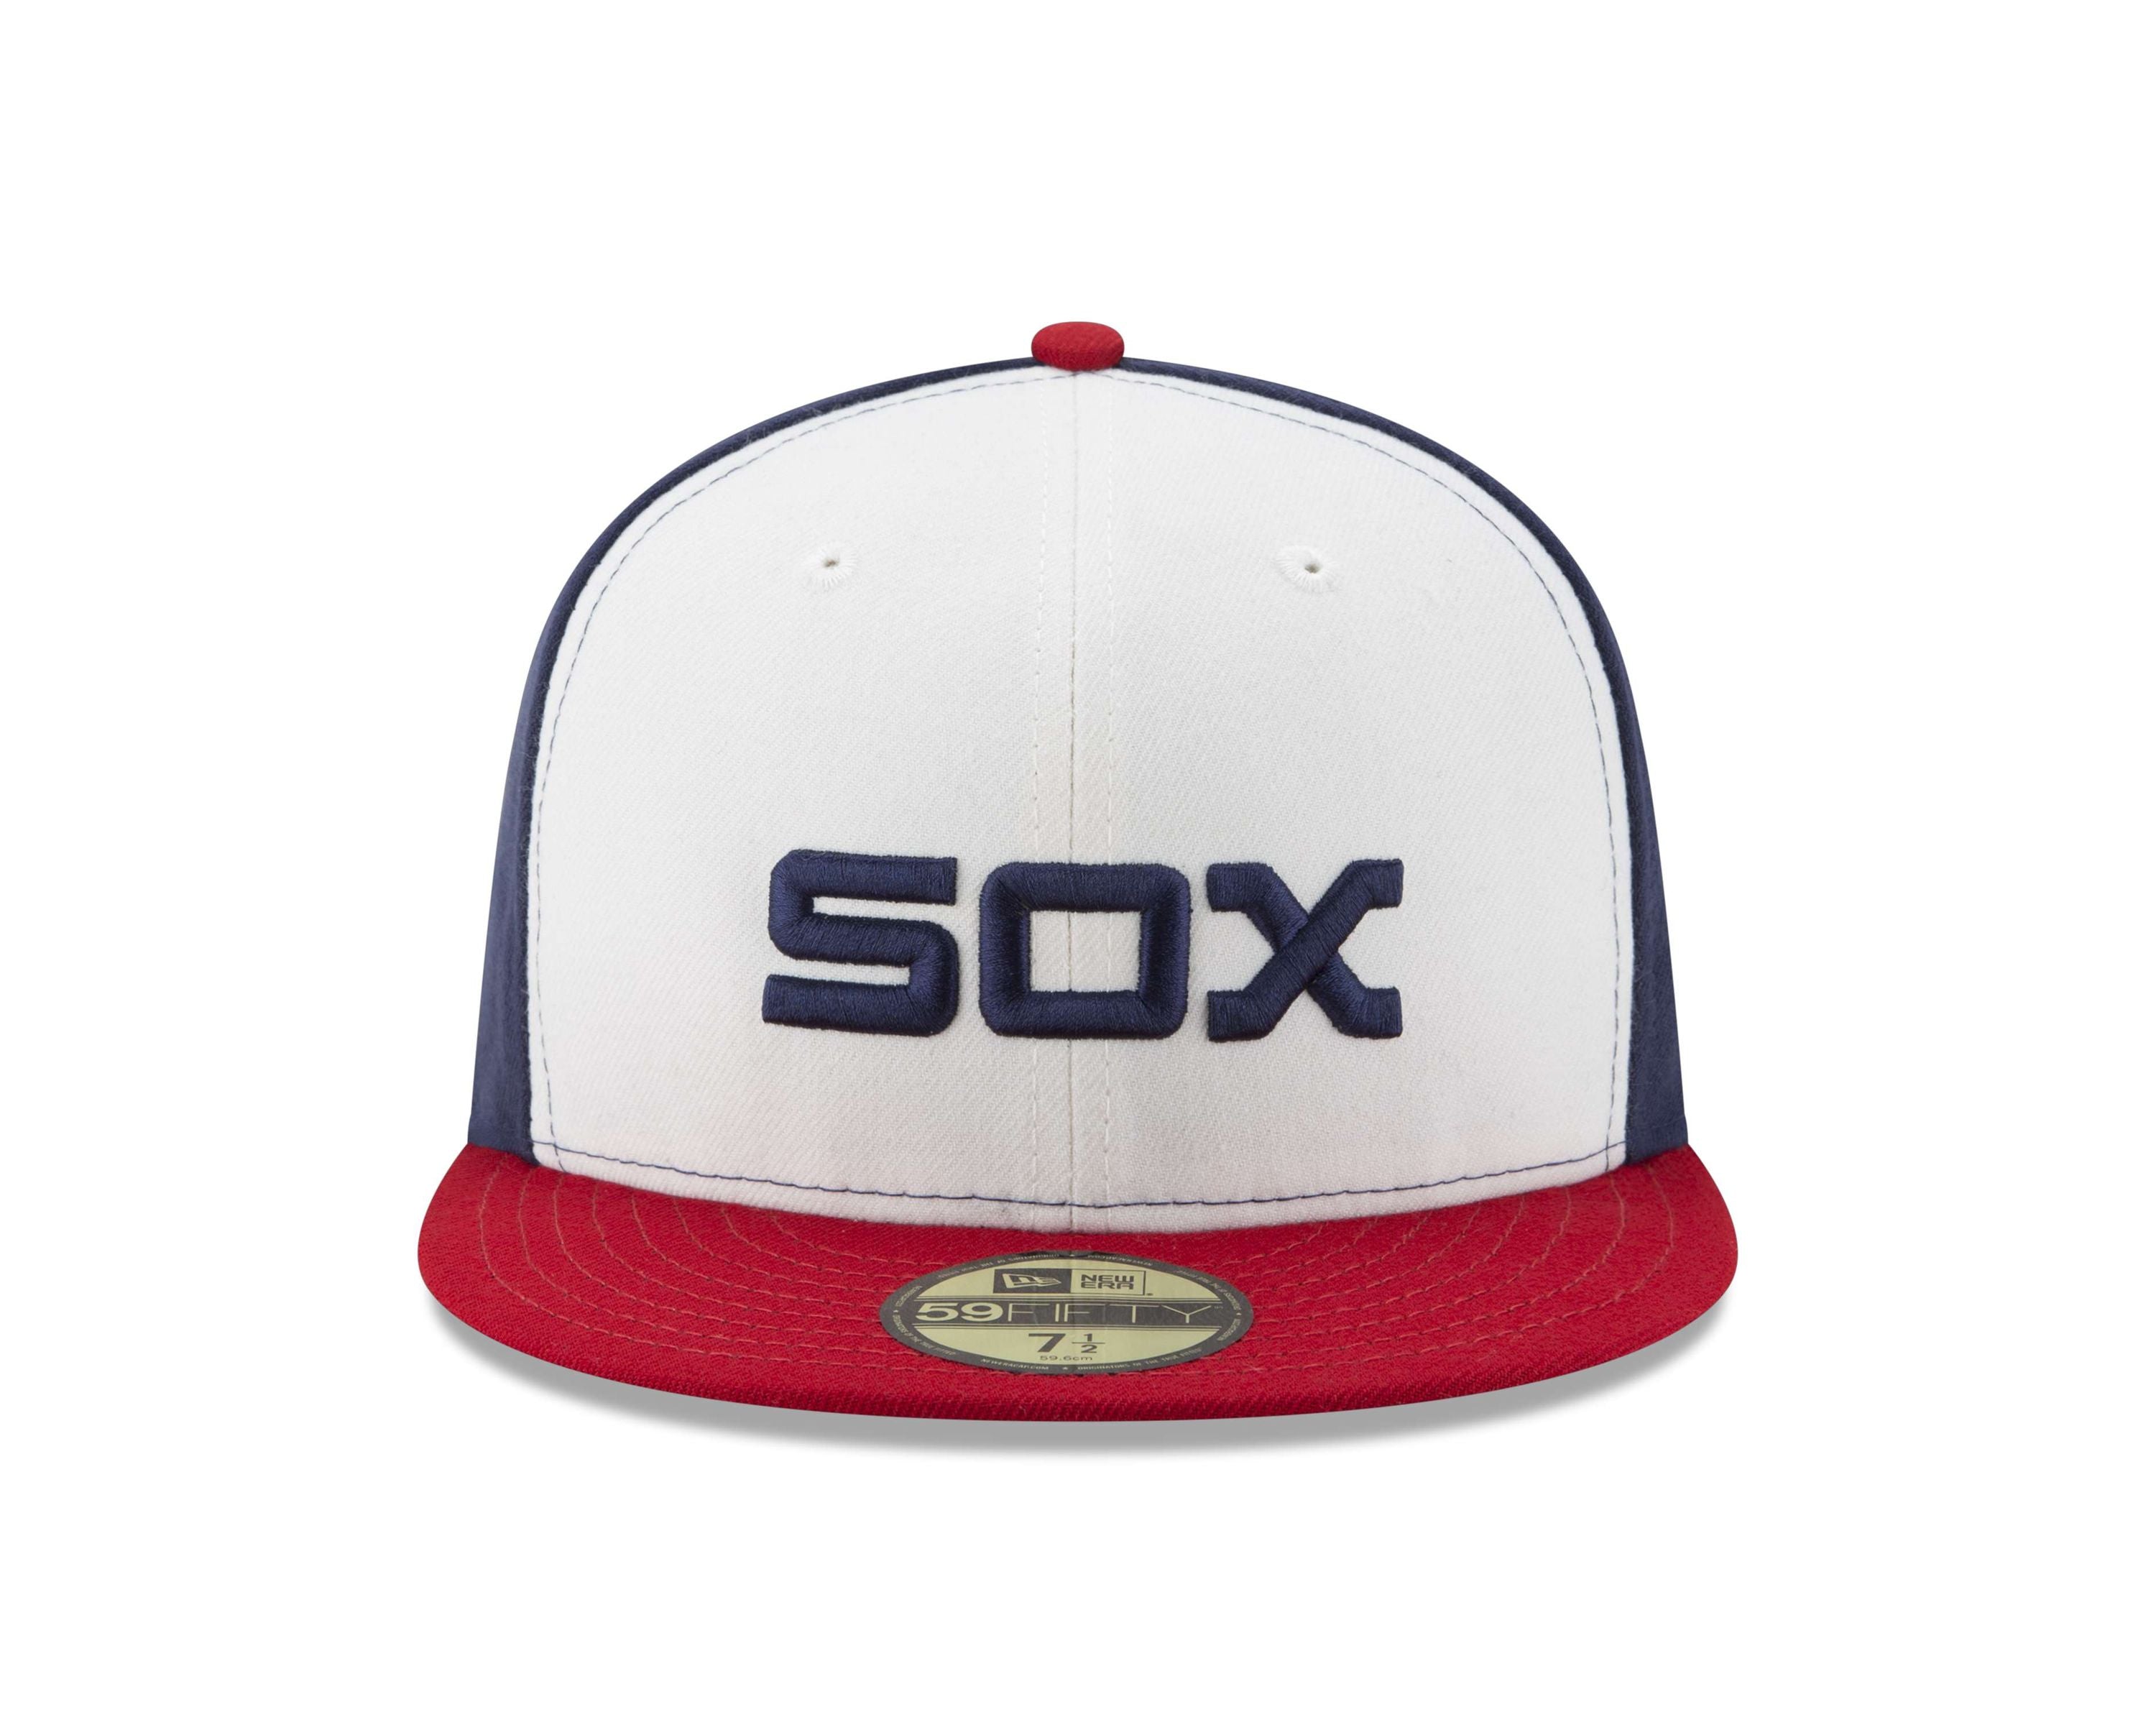 New Era - MLB Chicago White Sox Authentic Collection Alternate Fitted Cap -